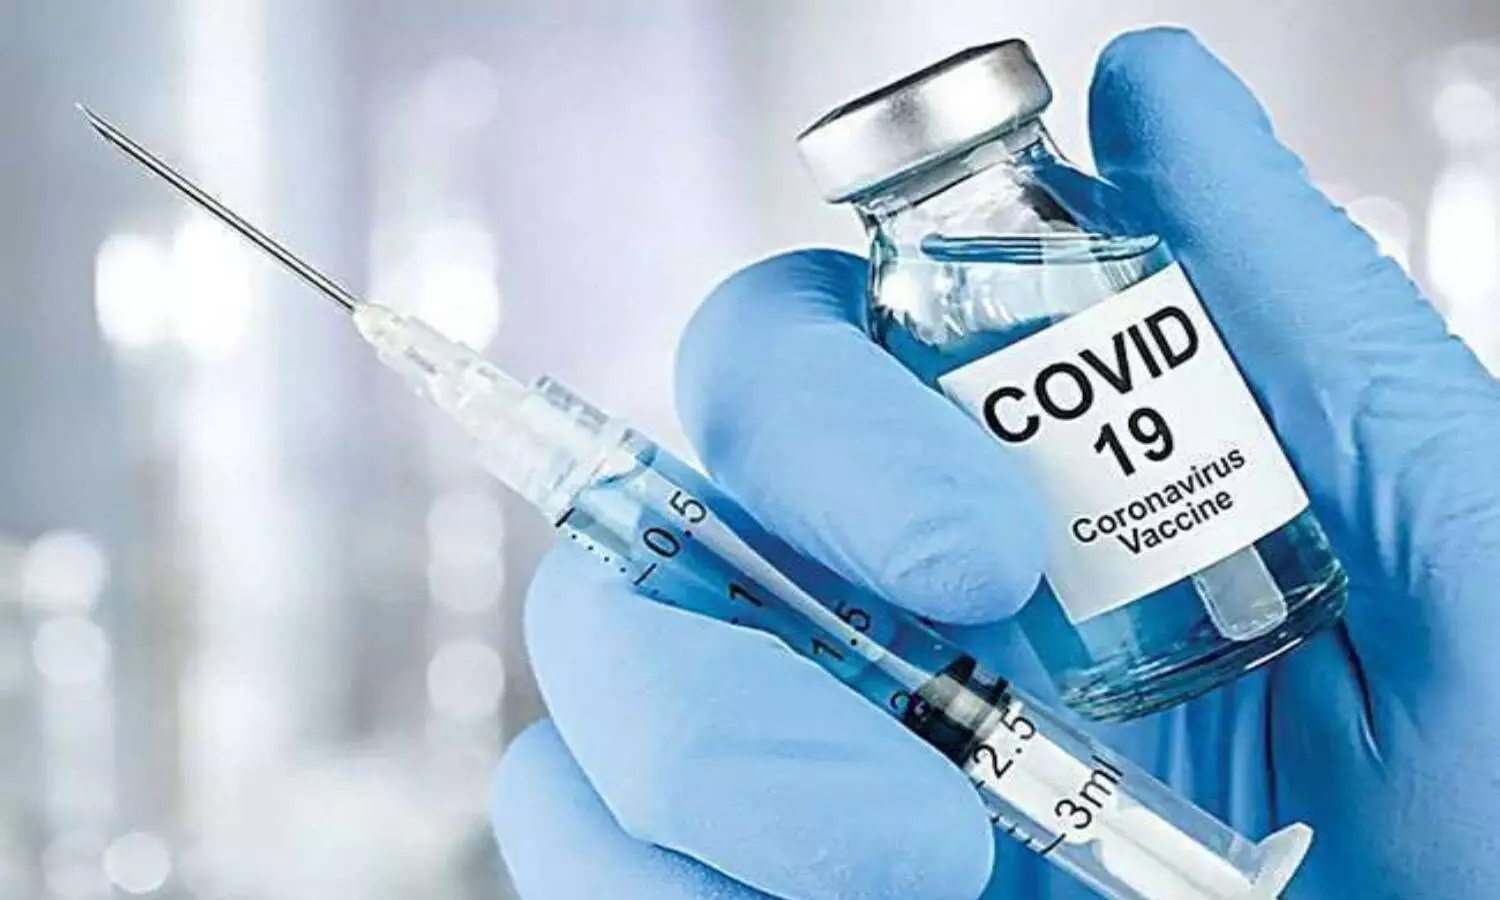 Two doctors get COVID-19 infection 20 days after 1st dose of vaccine.